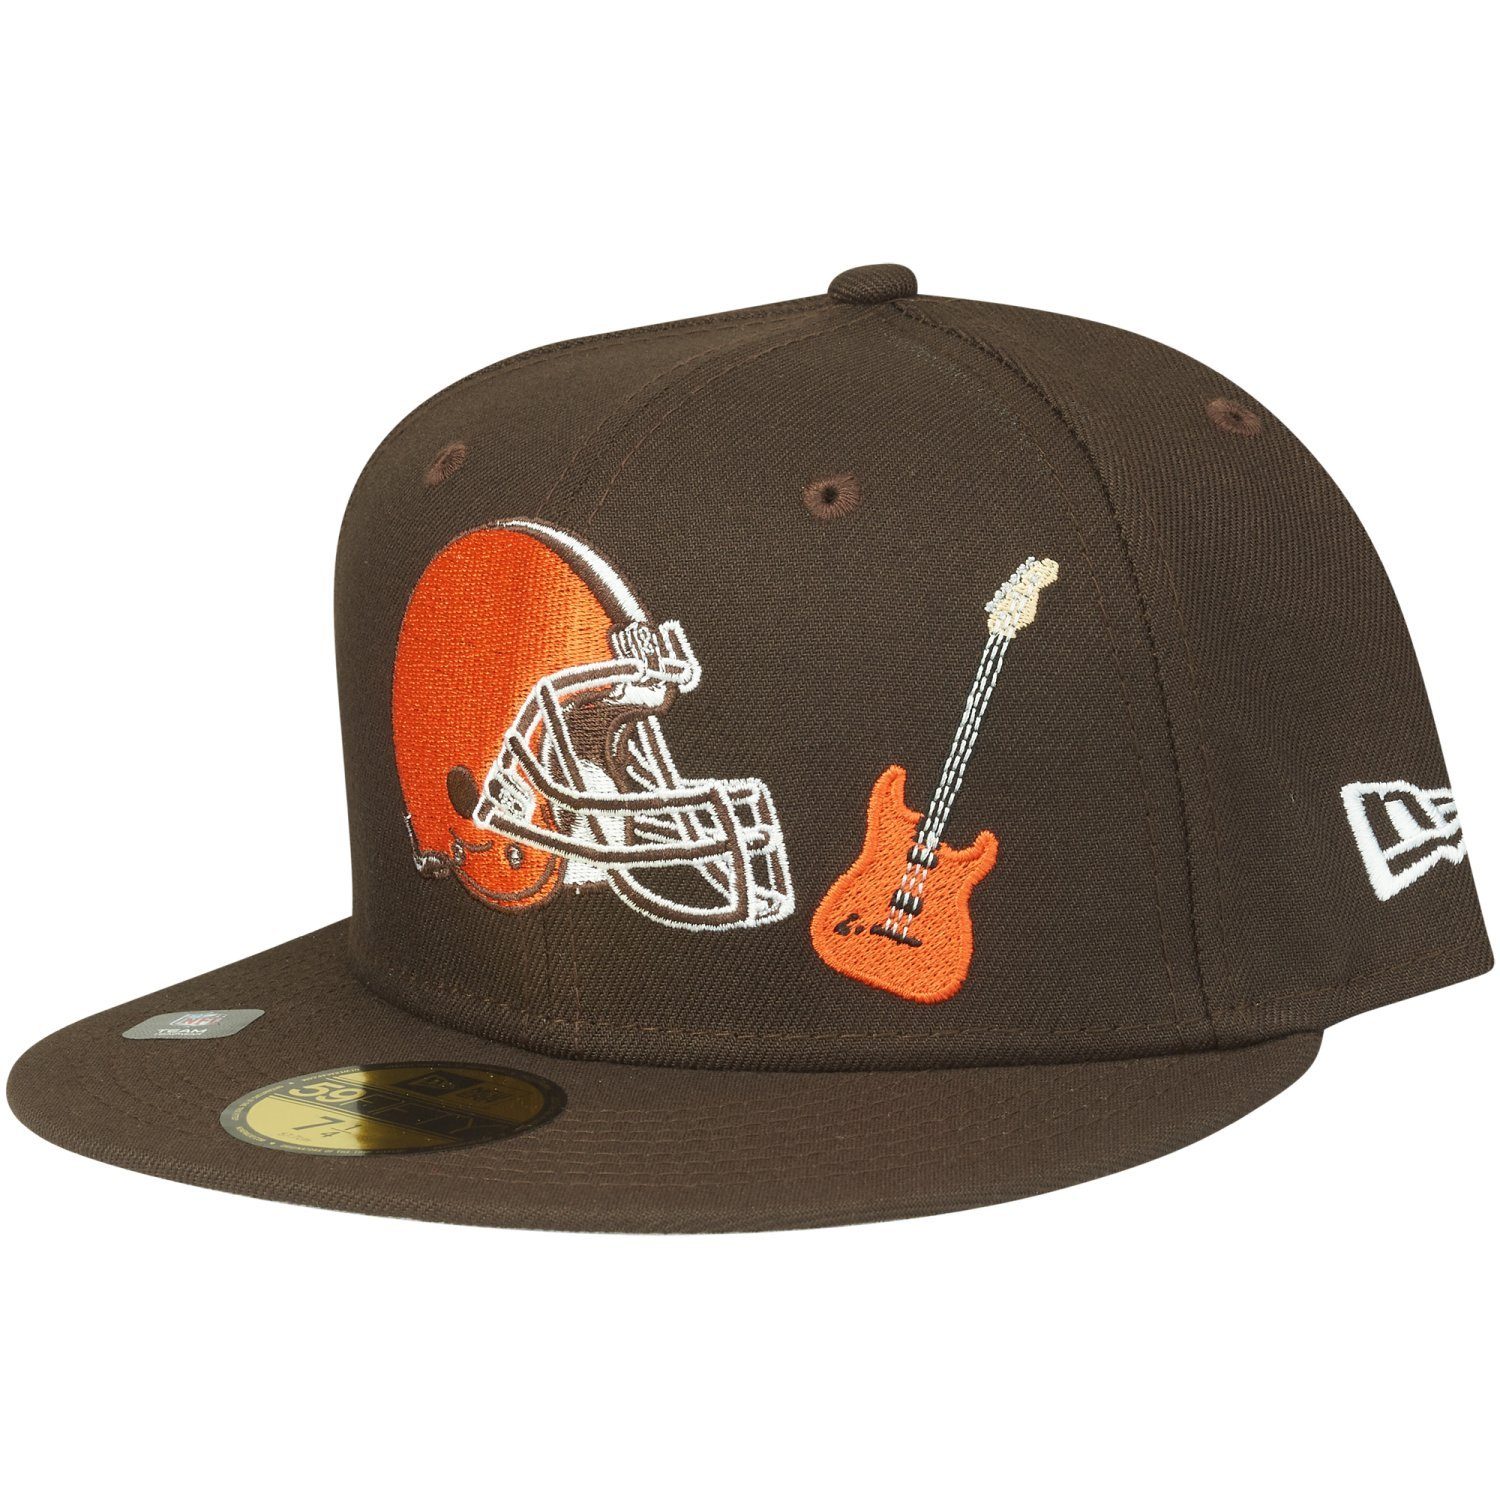 New Era Fitted Cap 59Fifty NFL CITY Cleveland Browns